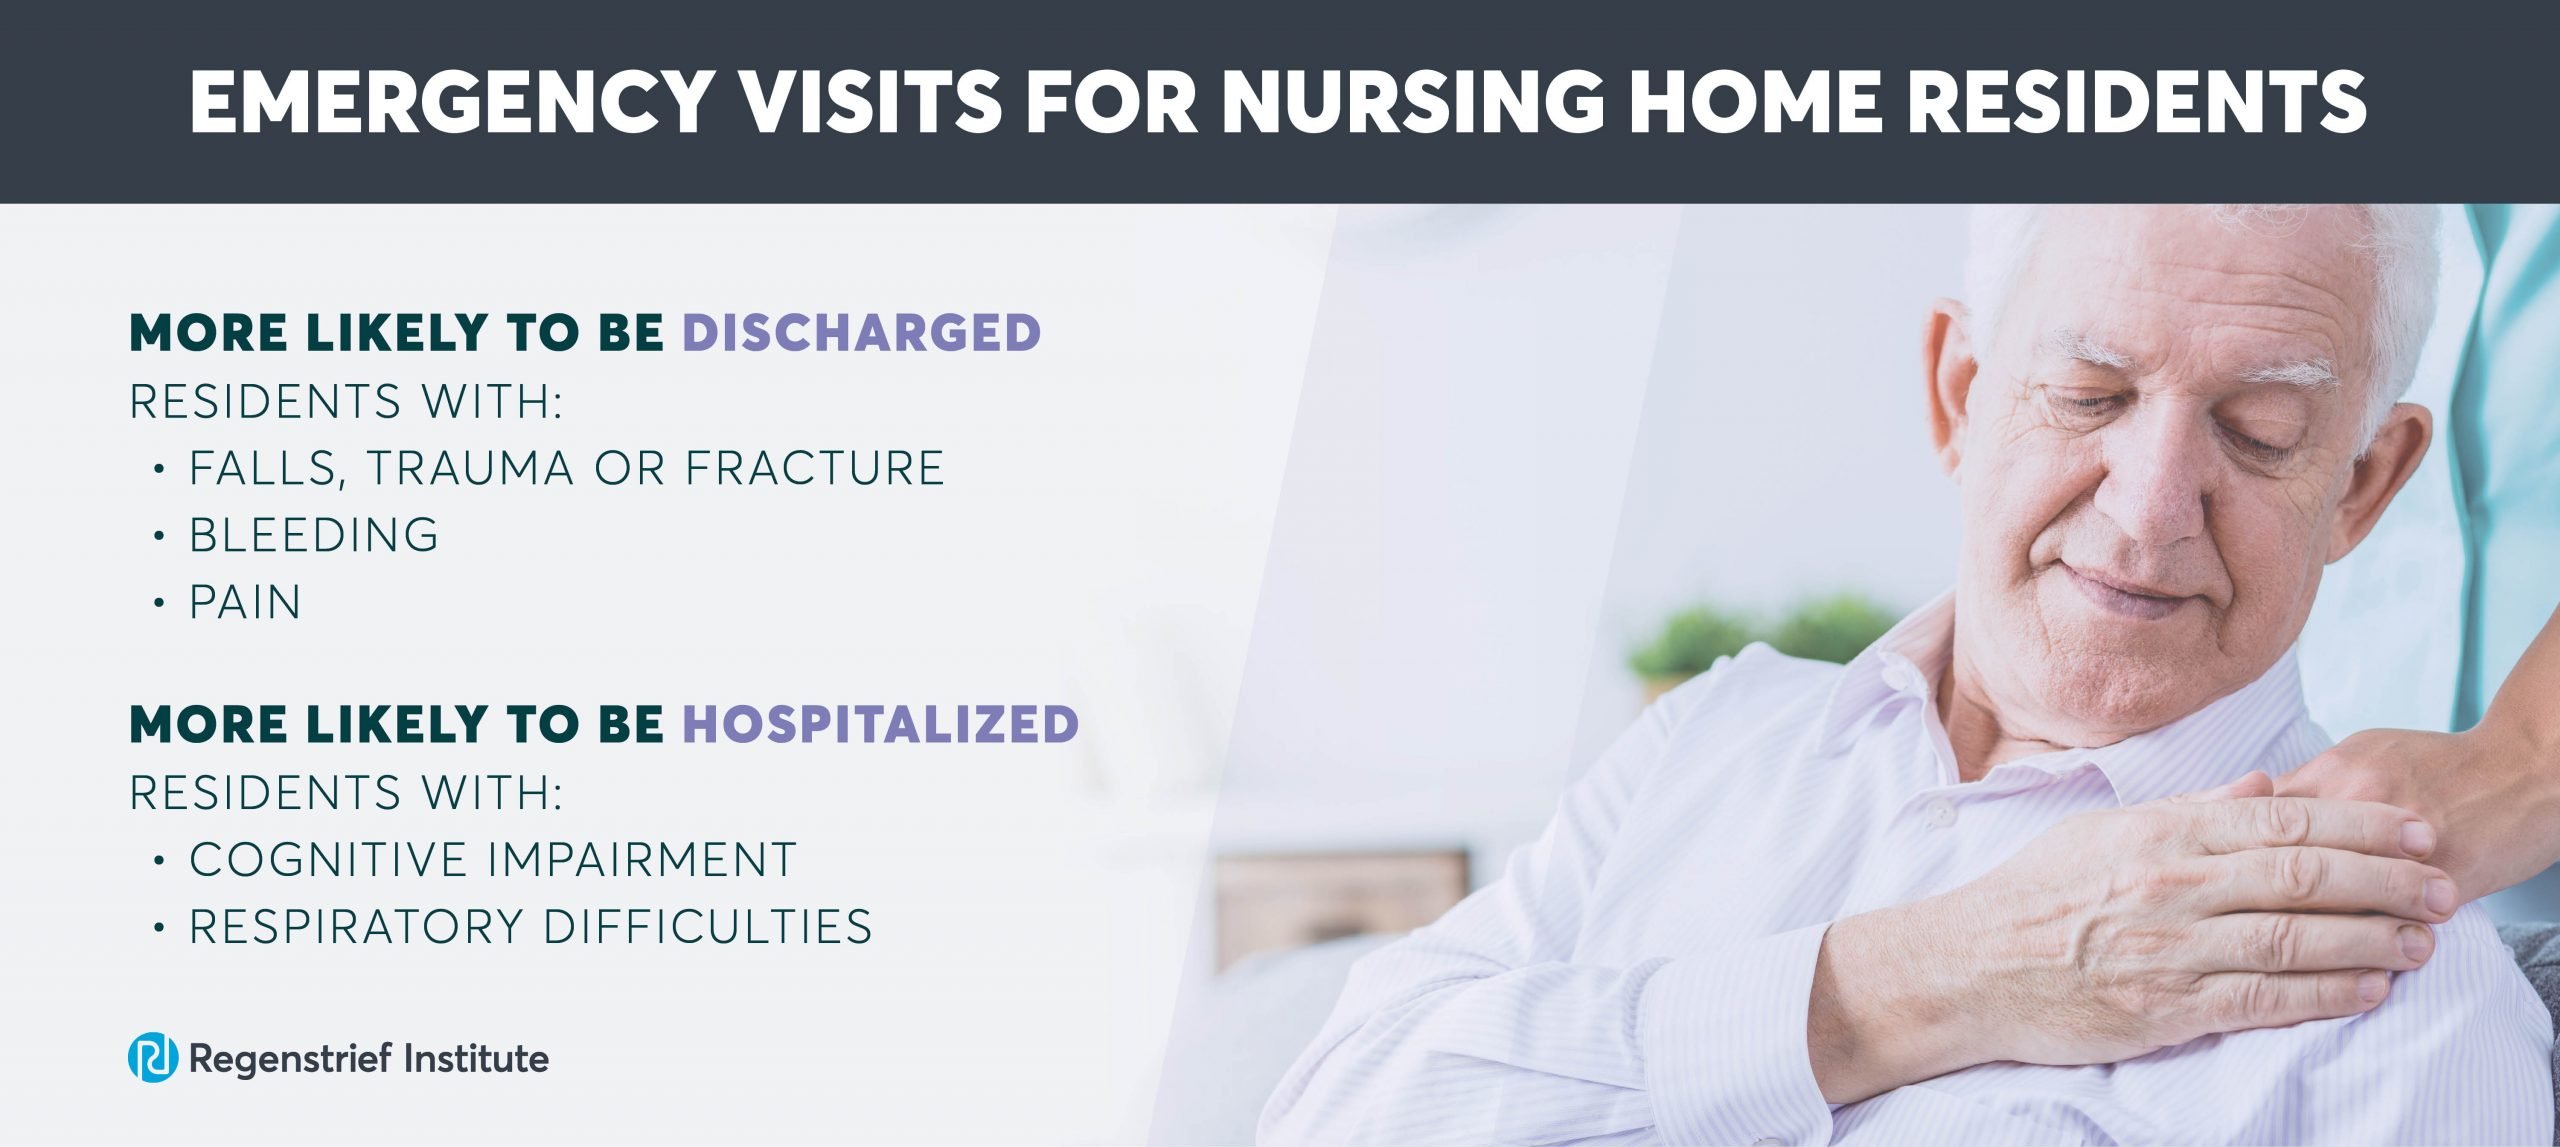 Nursing home residents with cognitive impairment are more likely to be hospitalized.